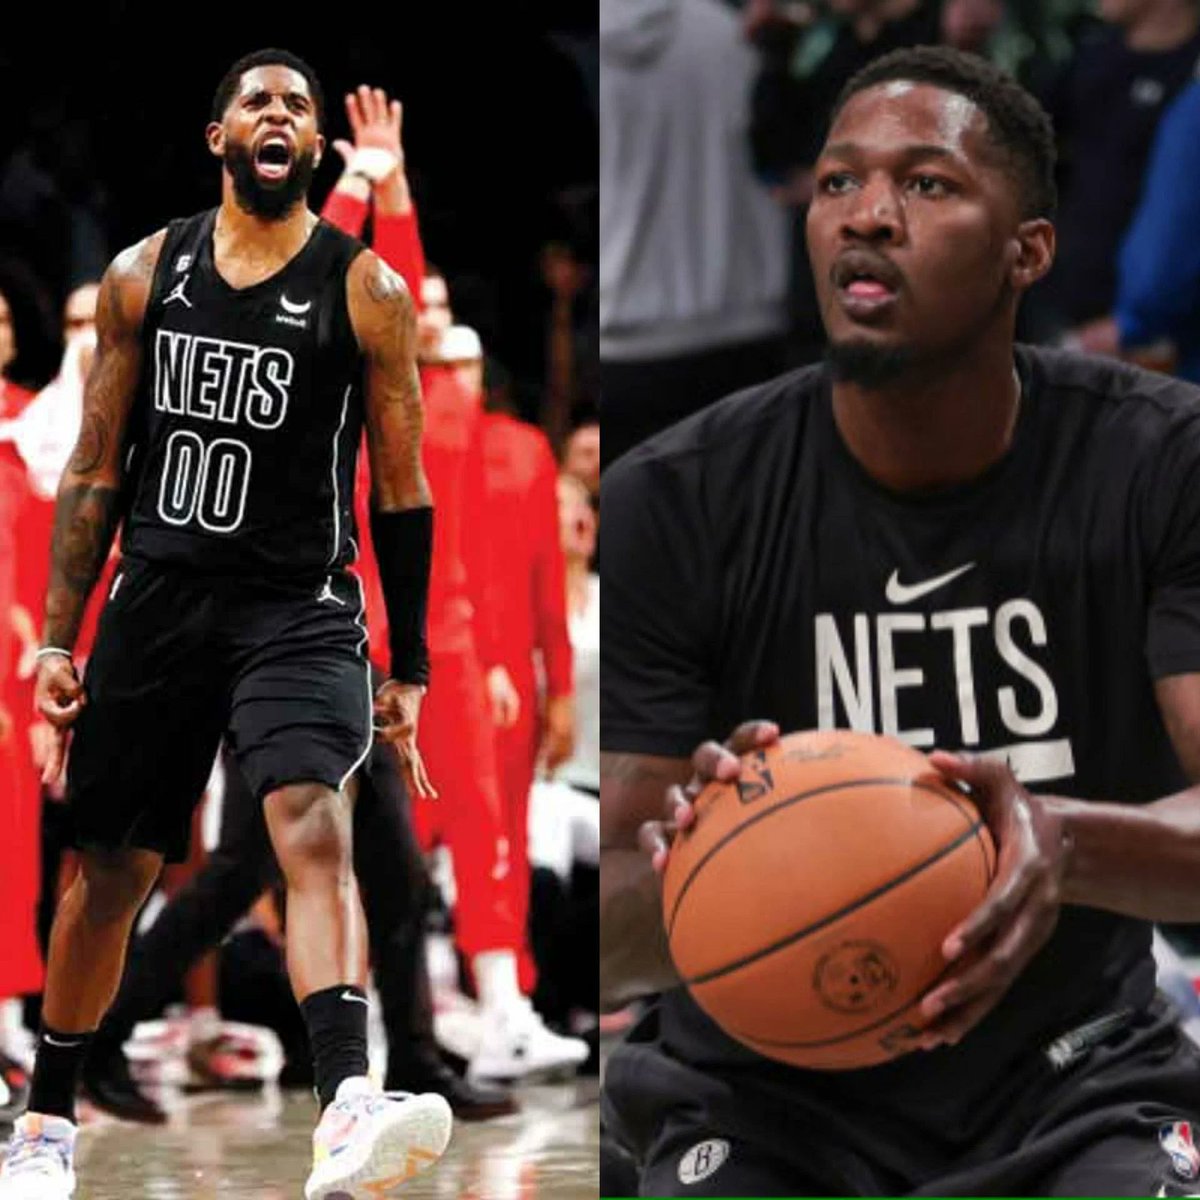 “The Nets are seeking a pick and a player for Dorian Finney-Smith, and a first-round pick for Royce O’Neale” - @JakeLFischer